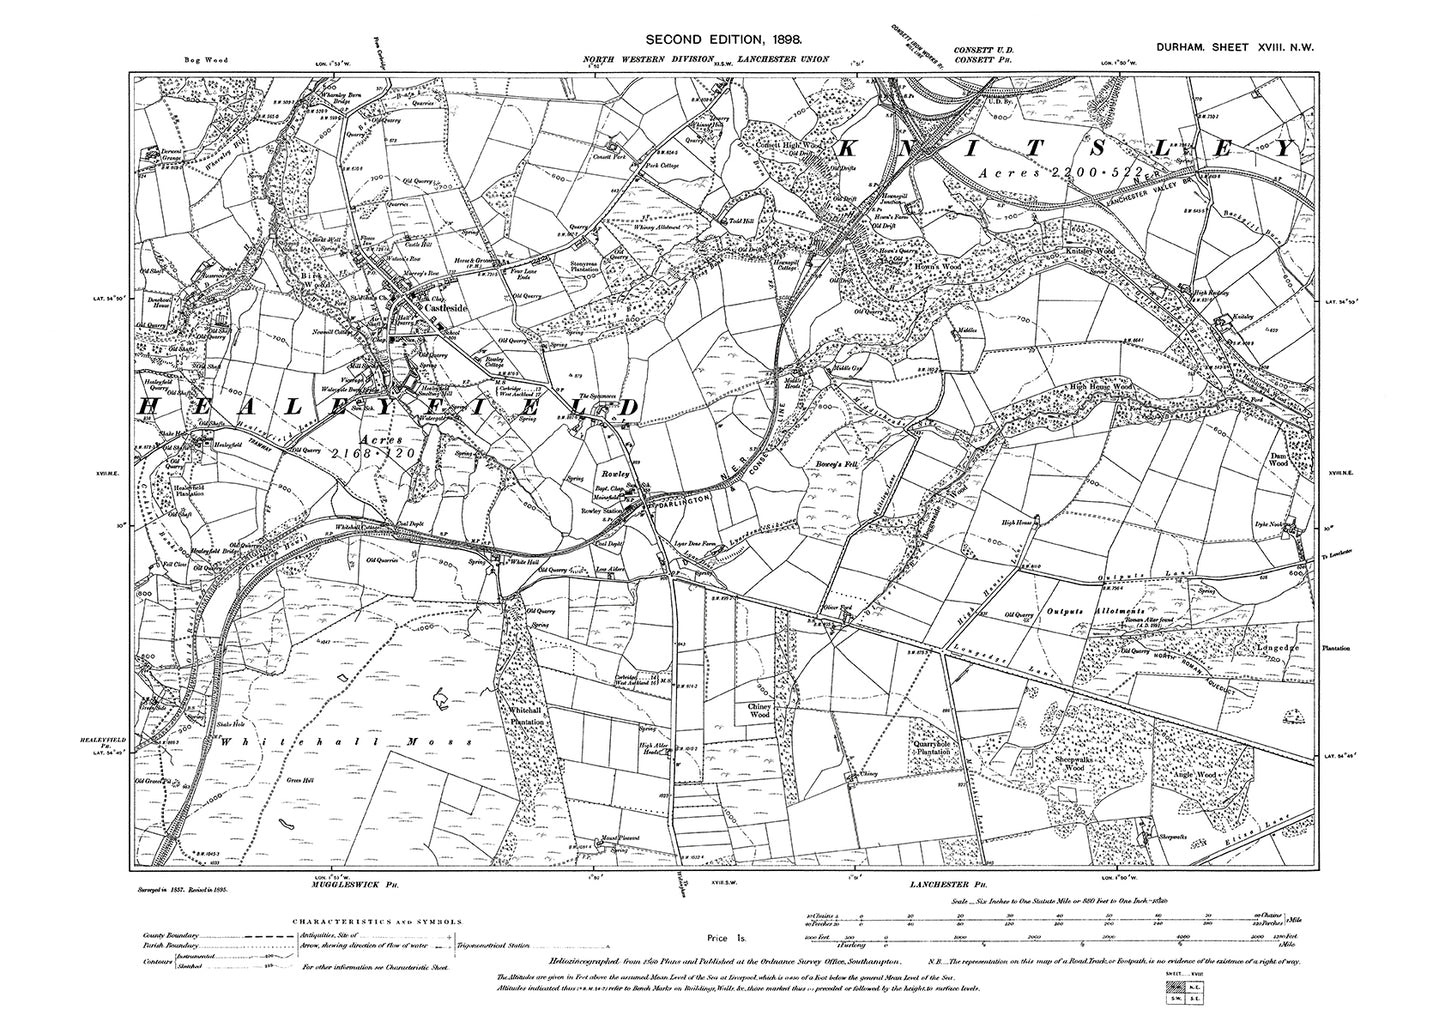 Old OS map dated 1898, showing Castleside in Durham - 18NW